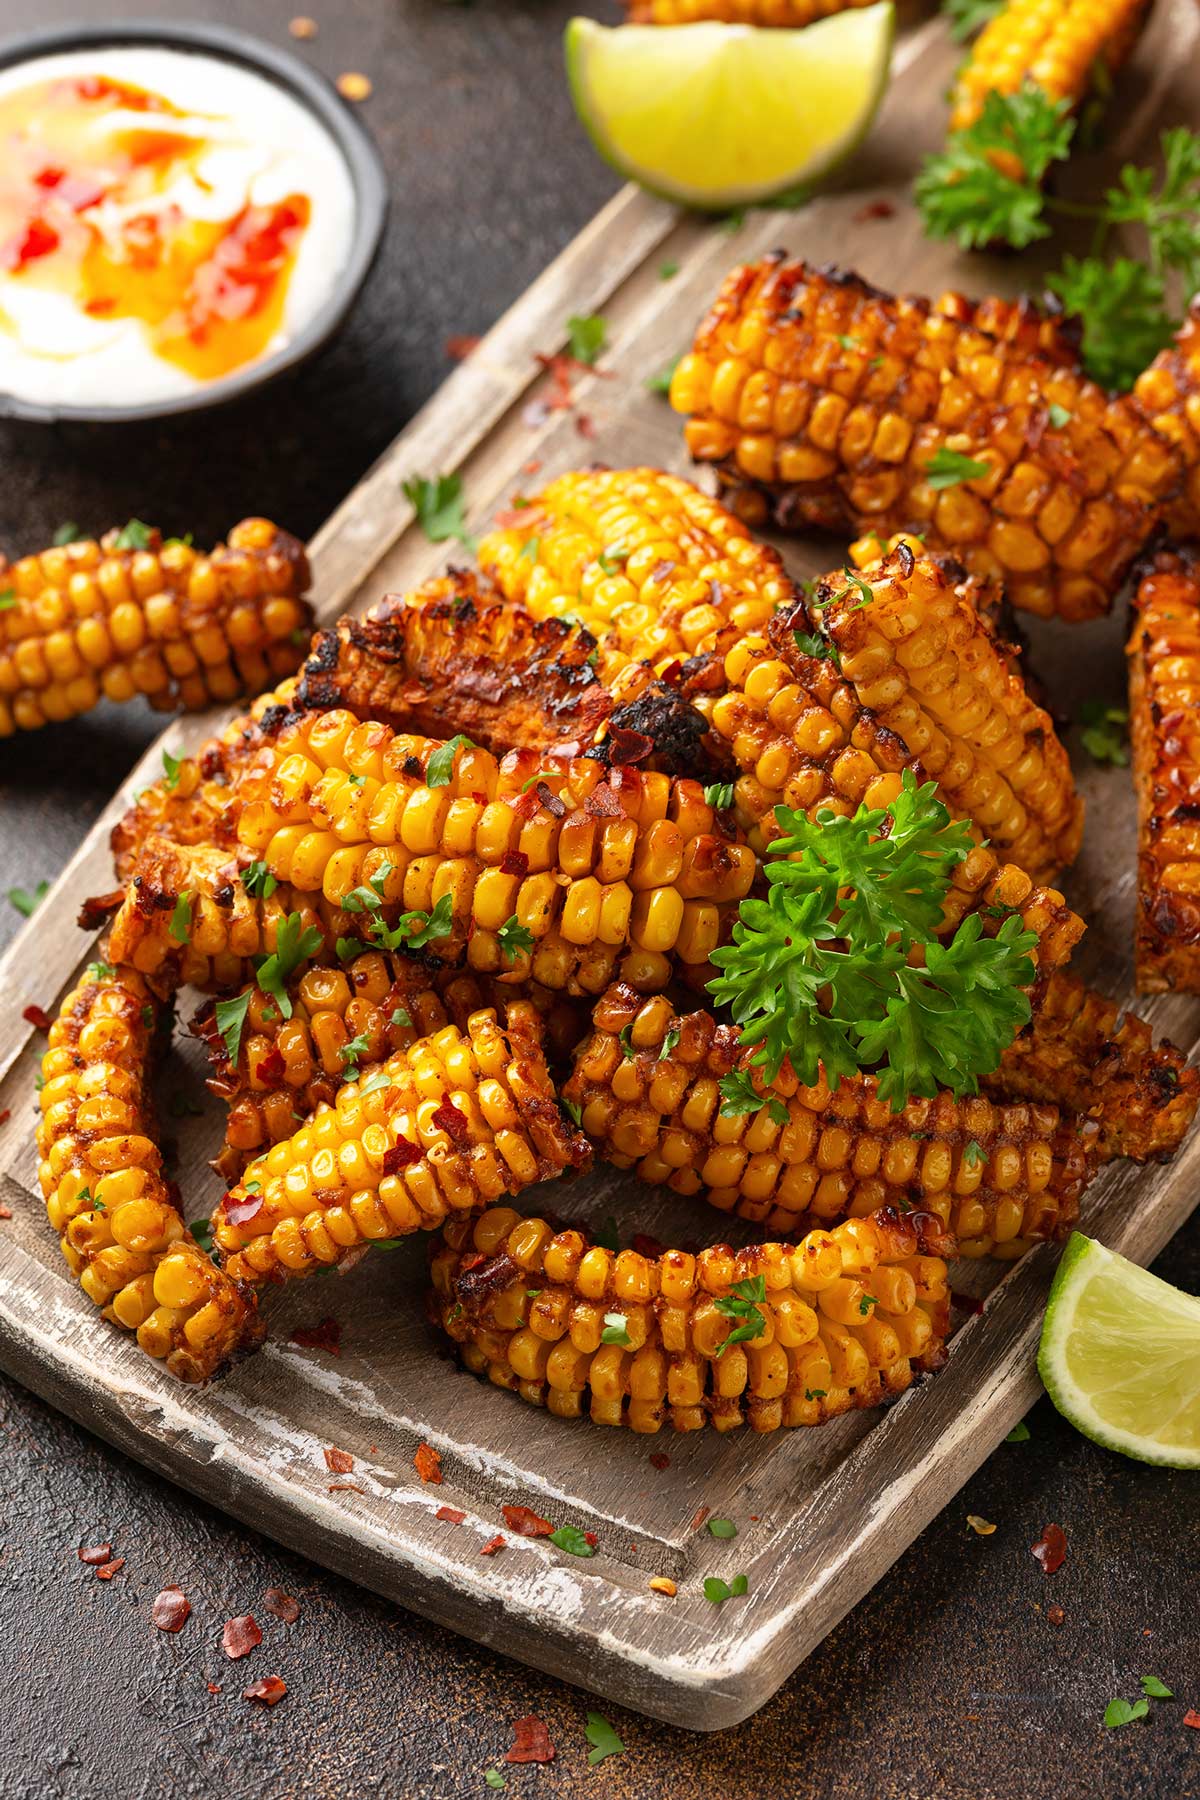 corn ribs on a wooden board garnished with parsley and lime wedges